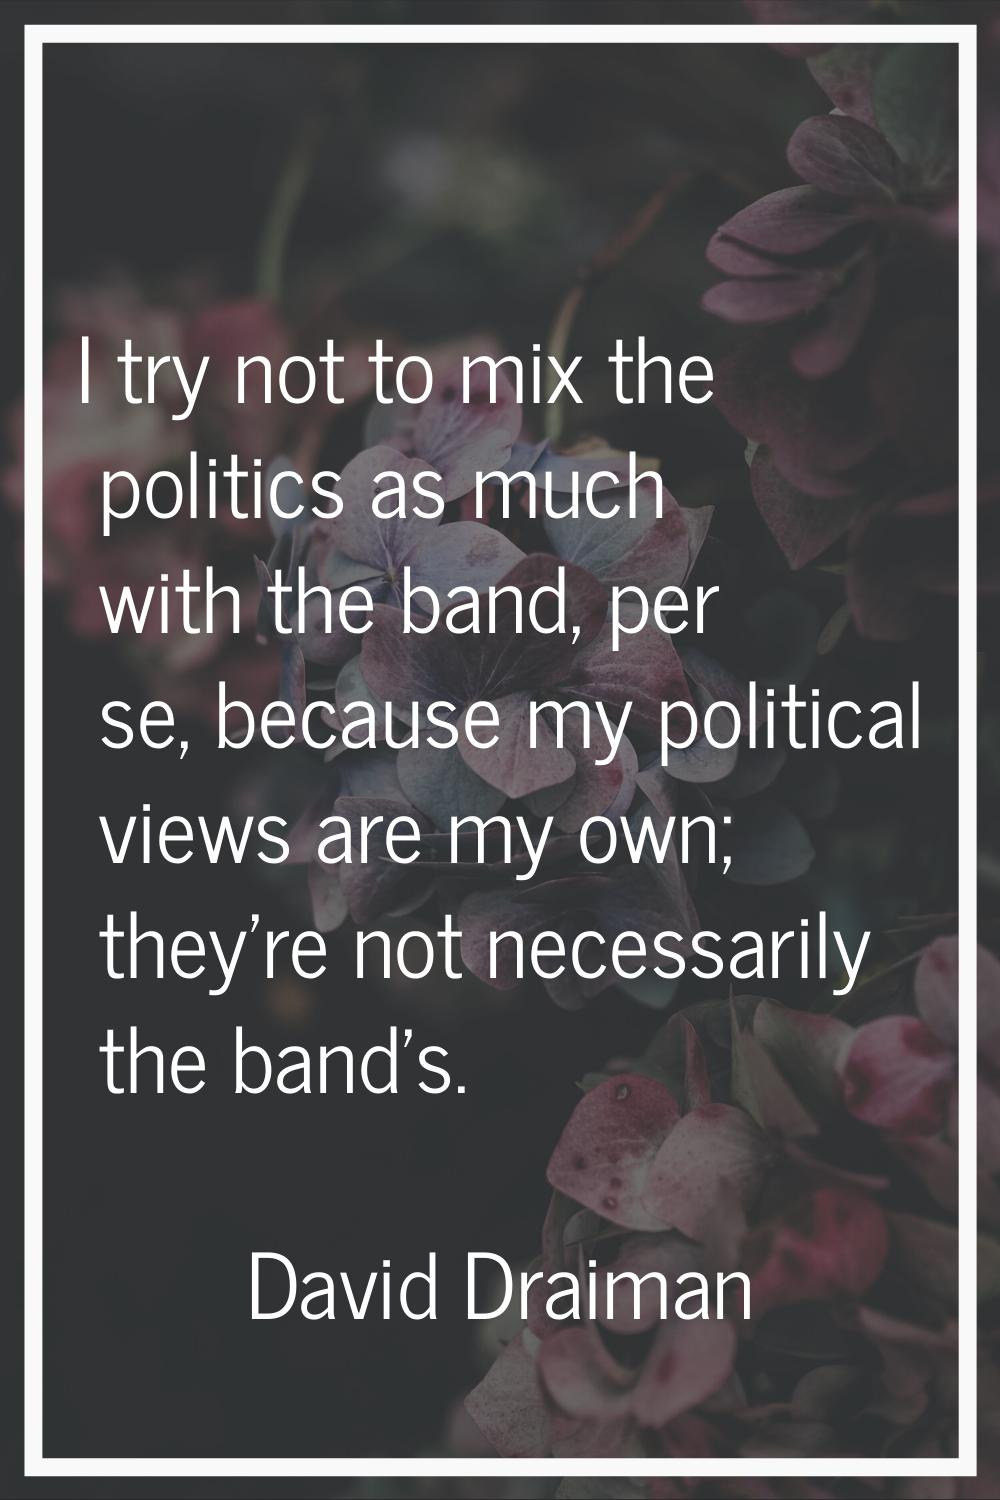 I try not to mix the politics as much with the band, per se, because my political views are my own;